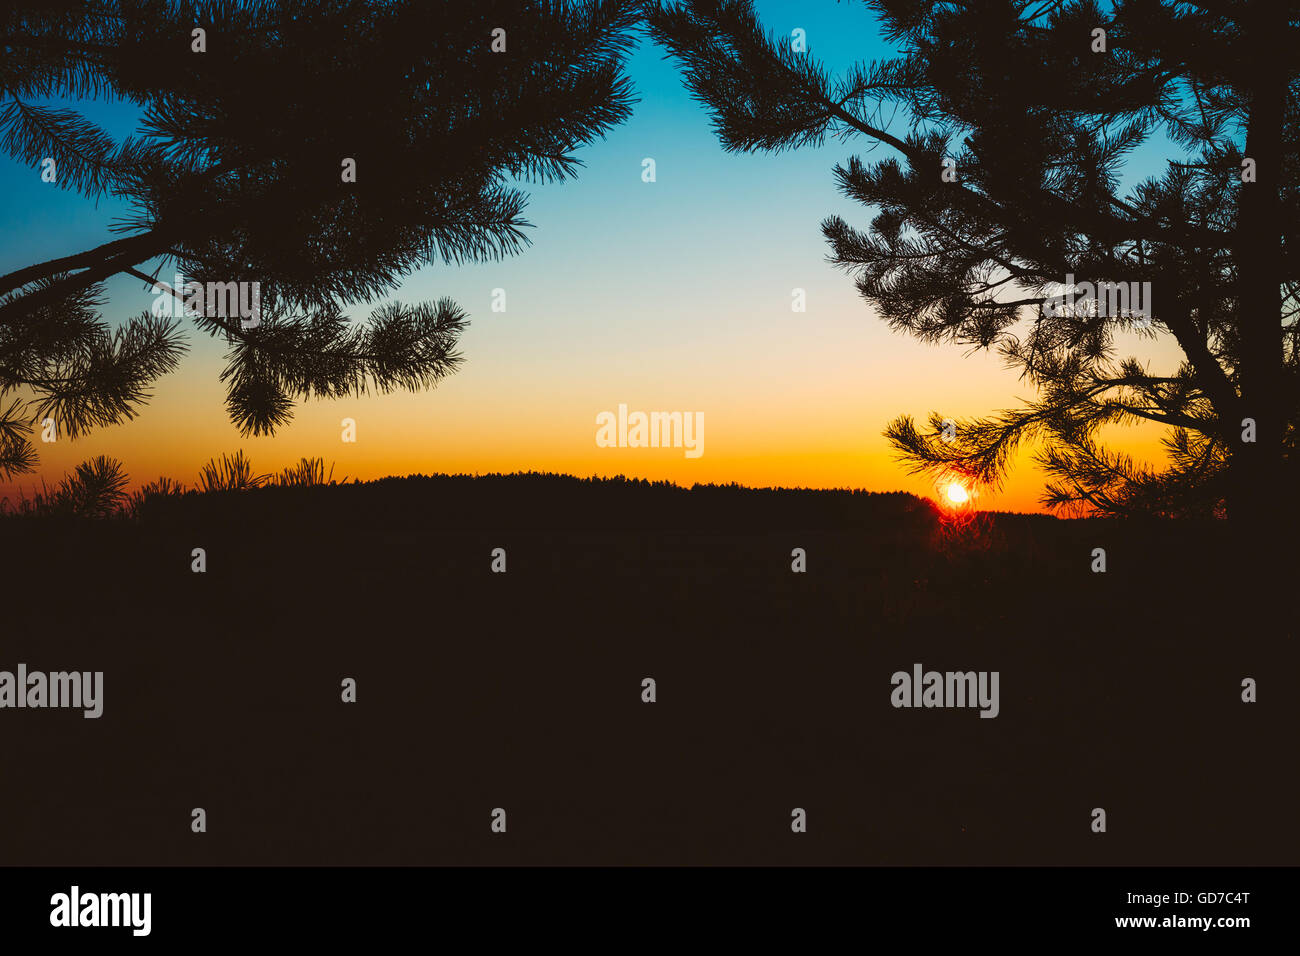 Silhouettes Of Fir Branches On Background Of Colorful Sunset Sky. Dark Land Ground And Forest On Horizon. Stock Photo